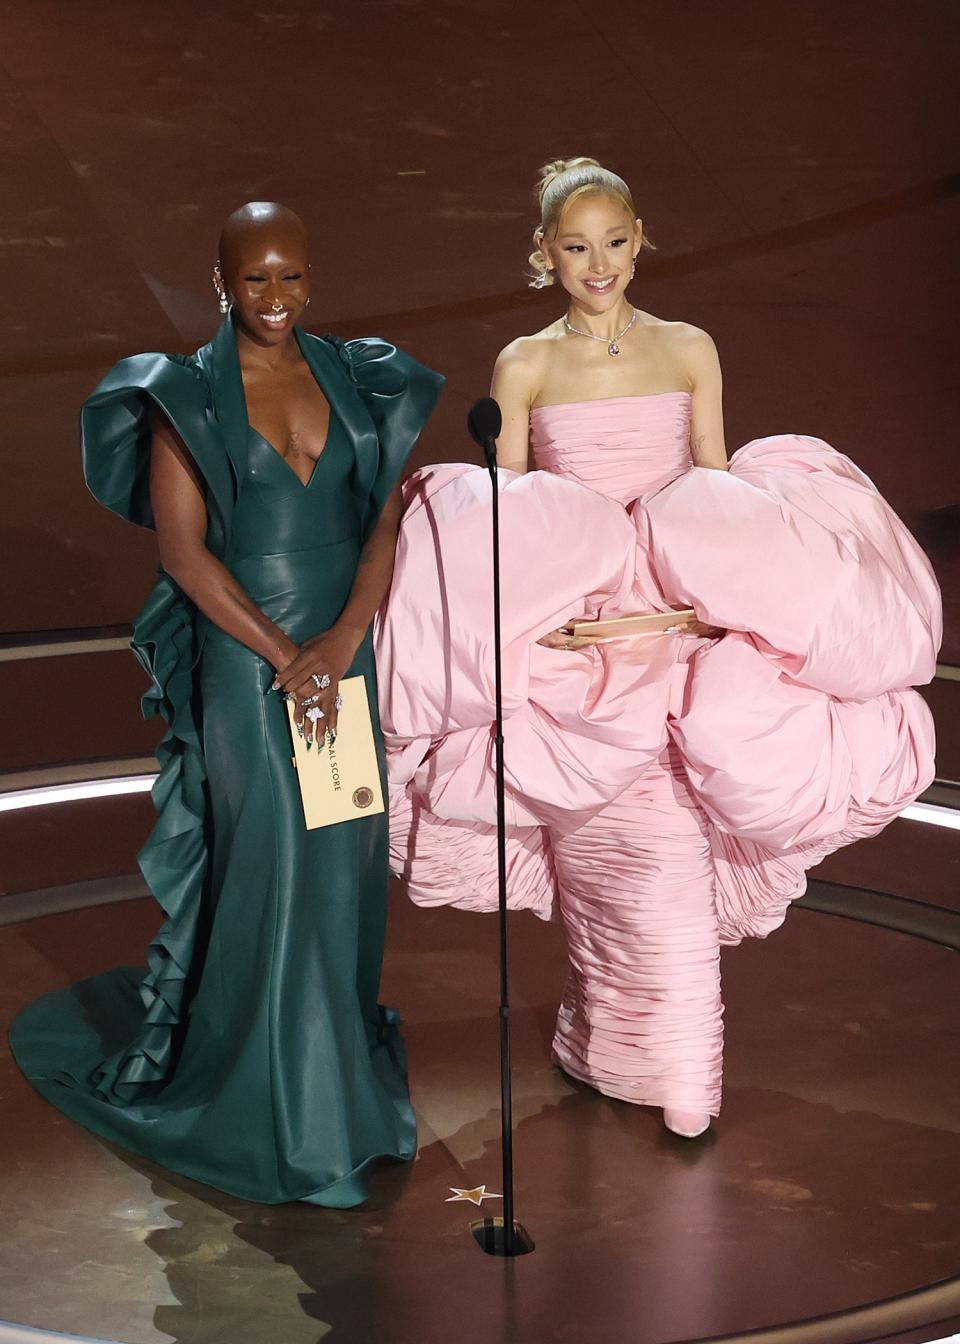 Even though their film Wicked won't hit theaters until November, Cynthia Erivo and Ariana Grande wore thematic green and pink gowns to the Oscars in March.